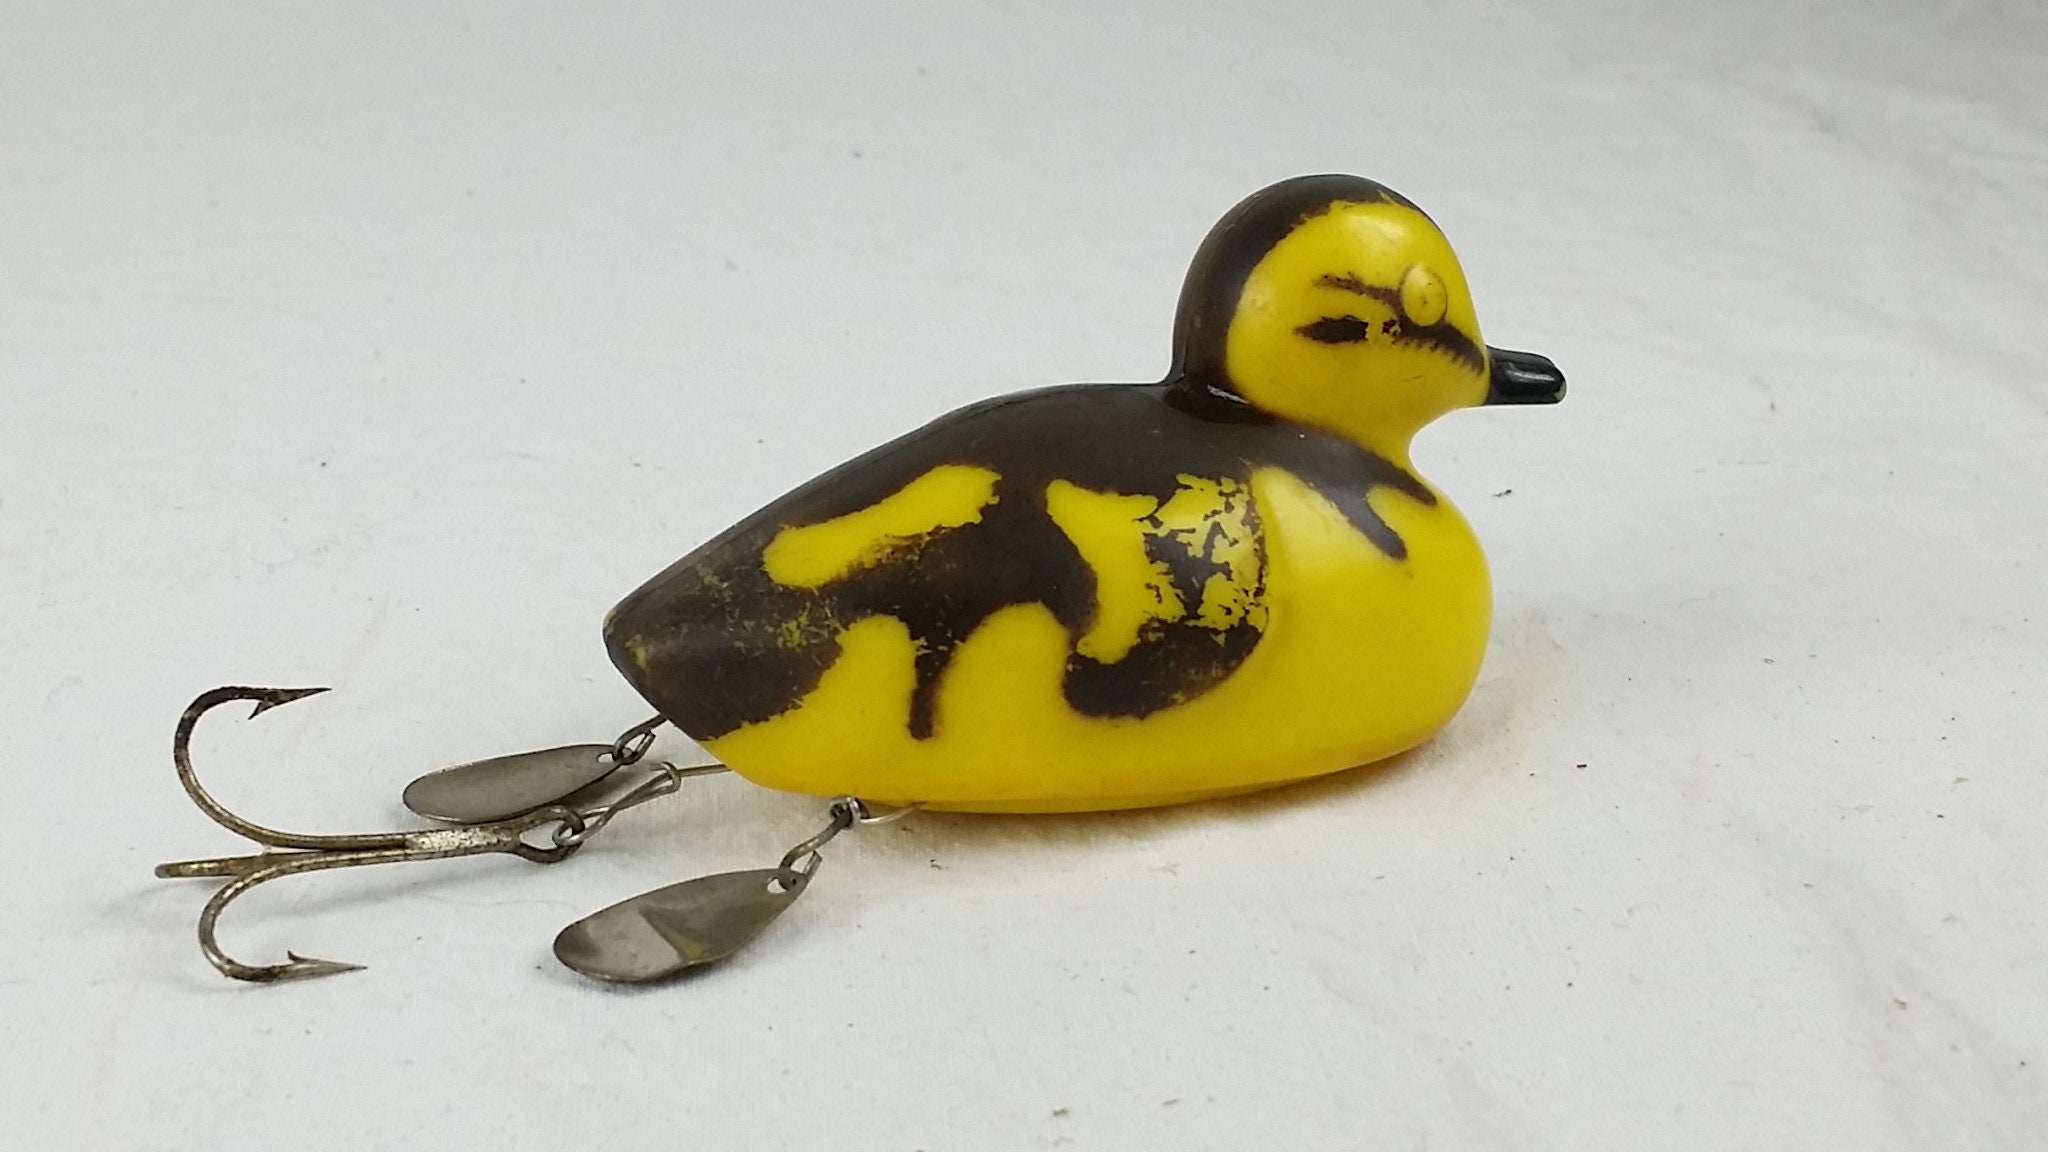 Vintage Fishing Lure, Cree Duck Fish Lure, Ugly Duckling Fishing